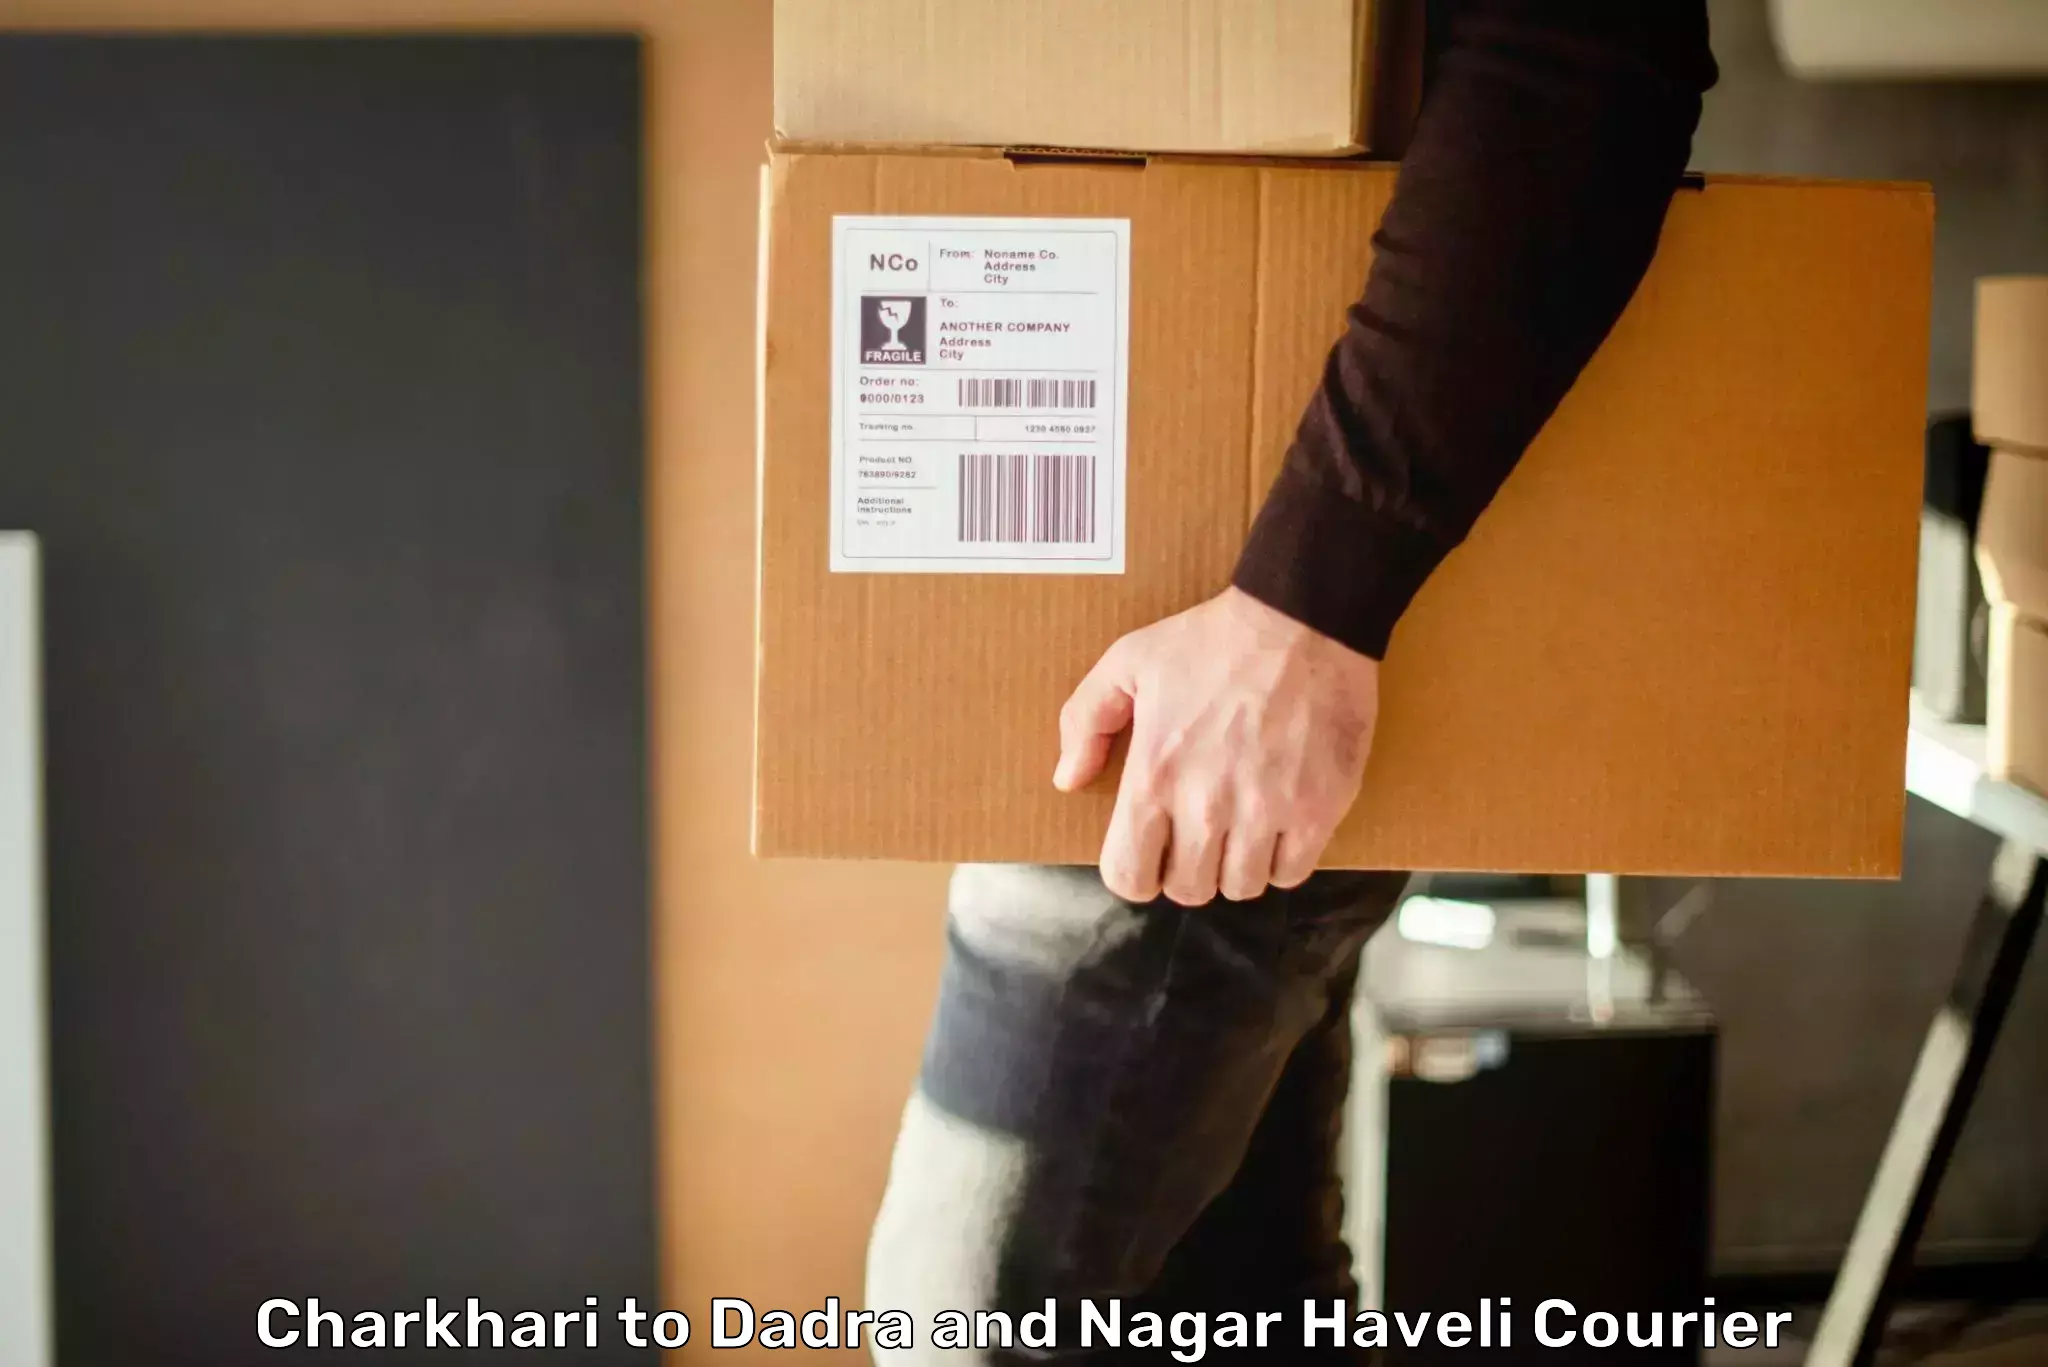 Large-scale shipping solutions Charkhari to Dadra and Nagar Haveli